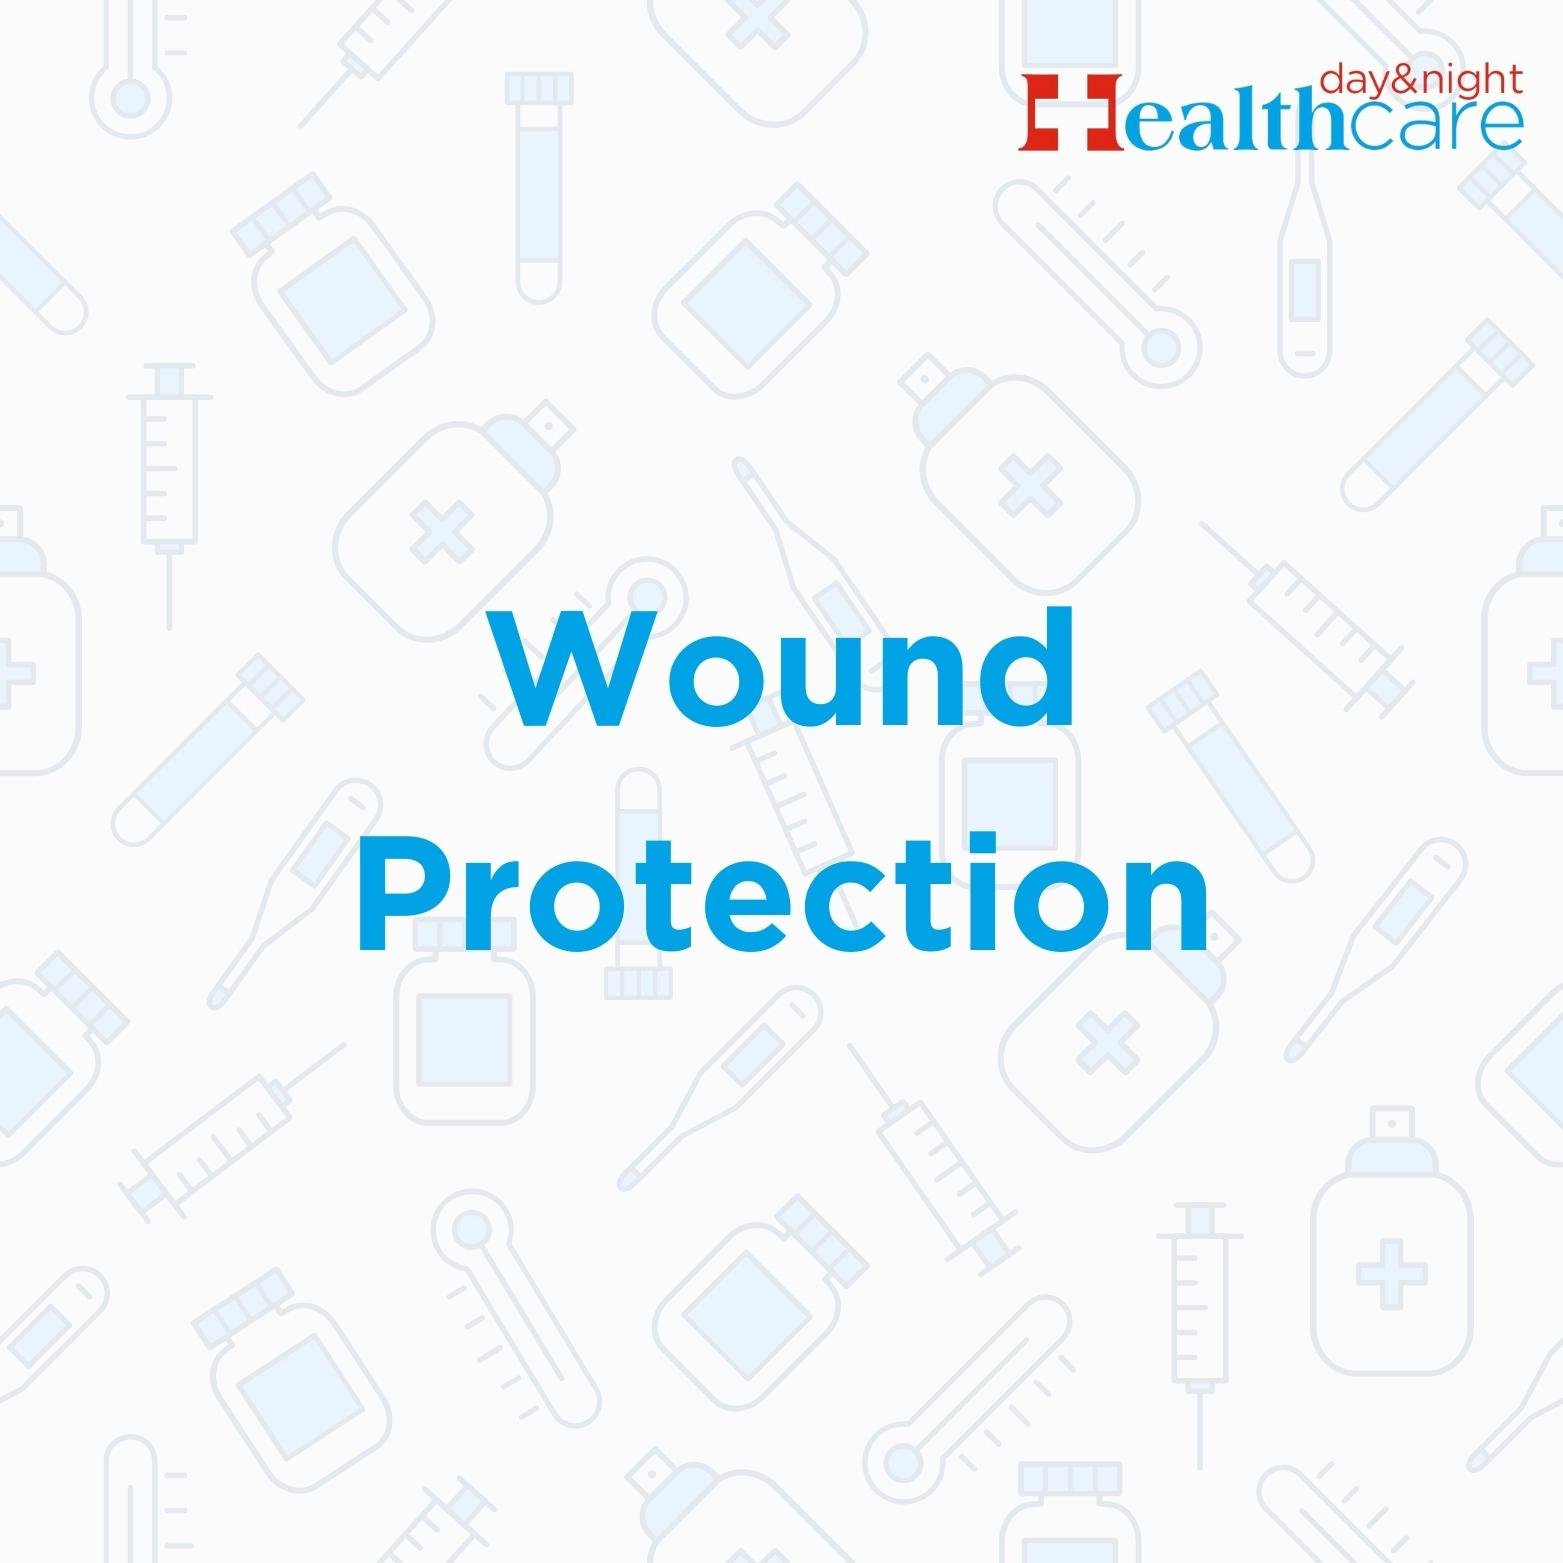 Wound Protection